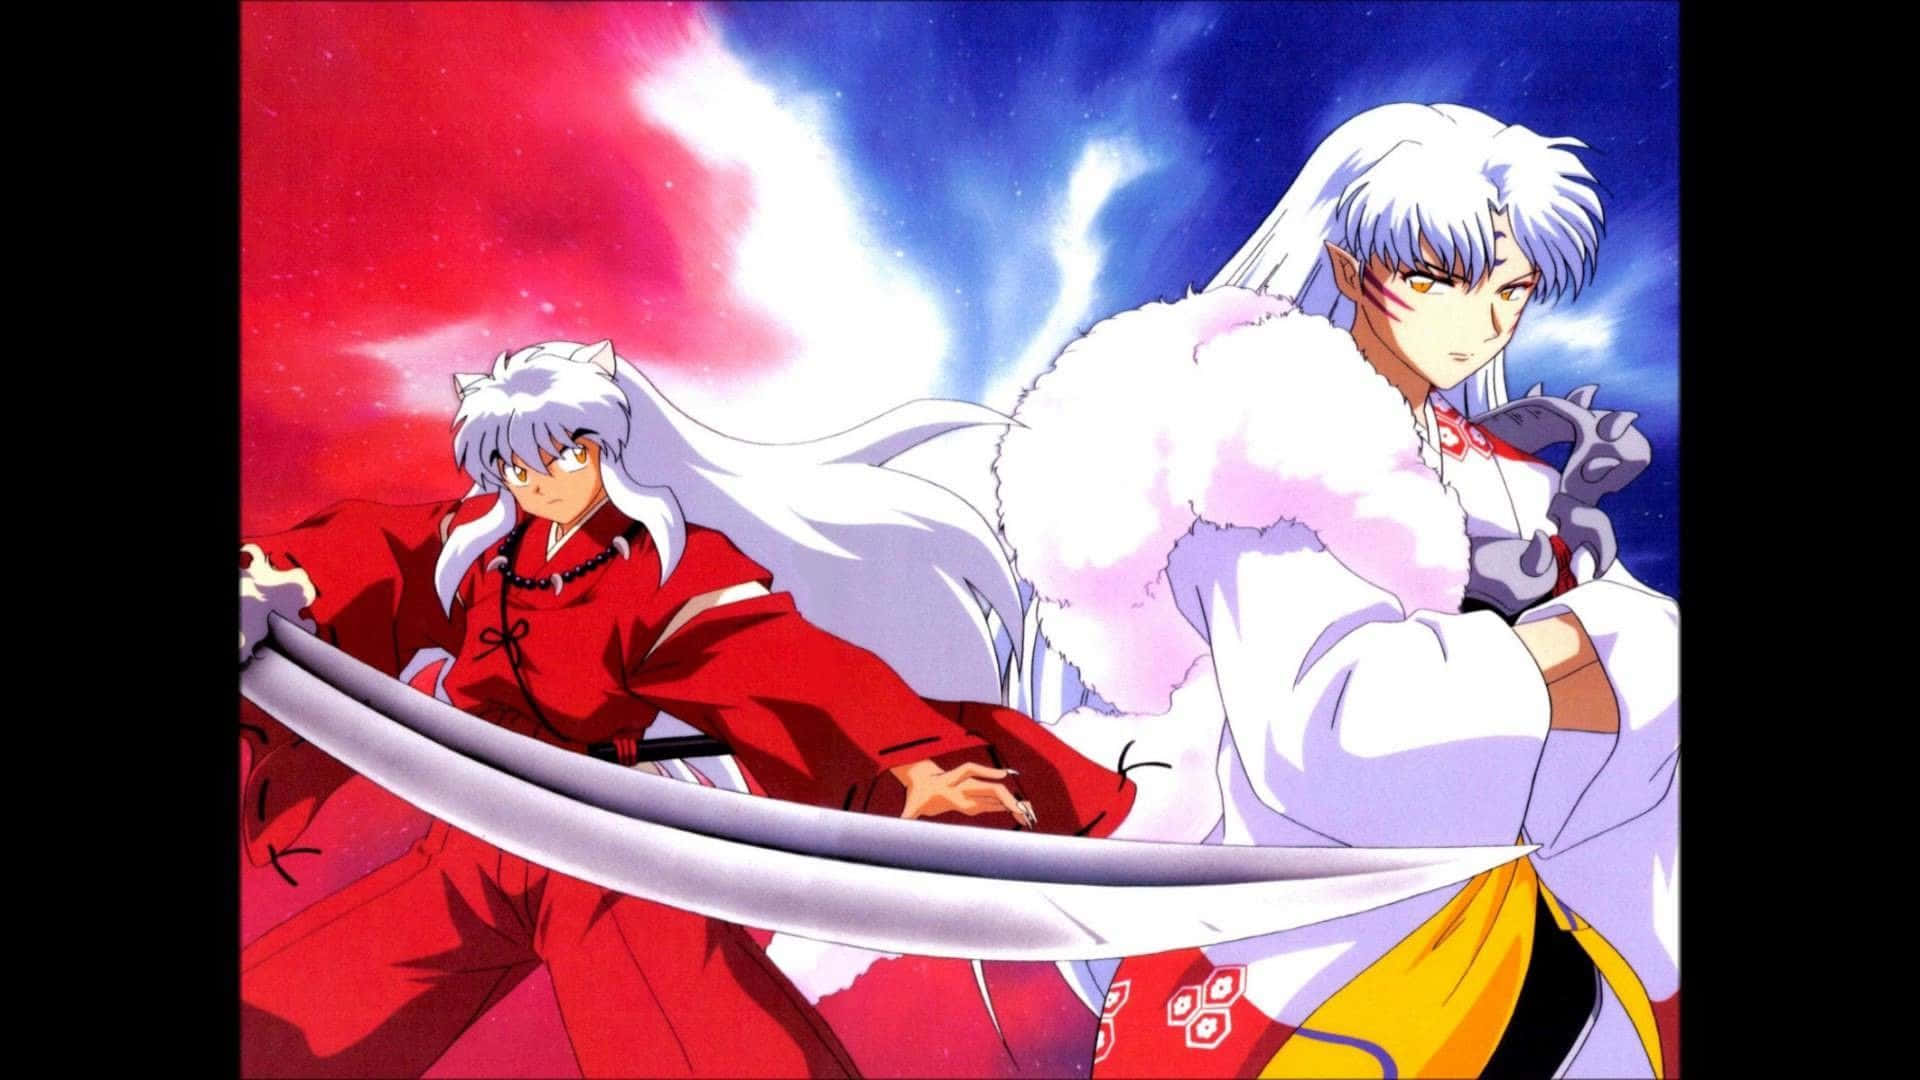 The iconic brothers, Inuyasha and Sesshomaru, ready for battle in a stunning HD wallpaper Wallpaper